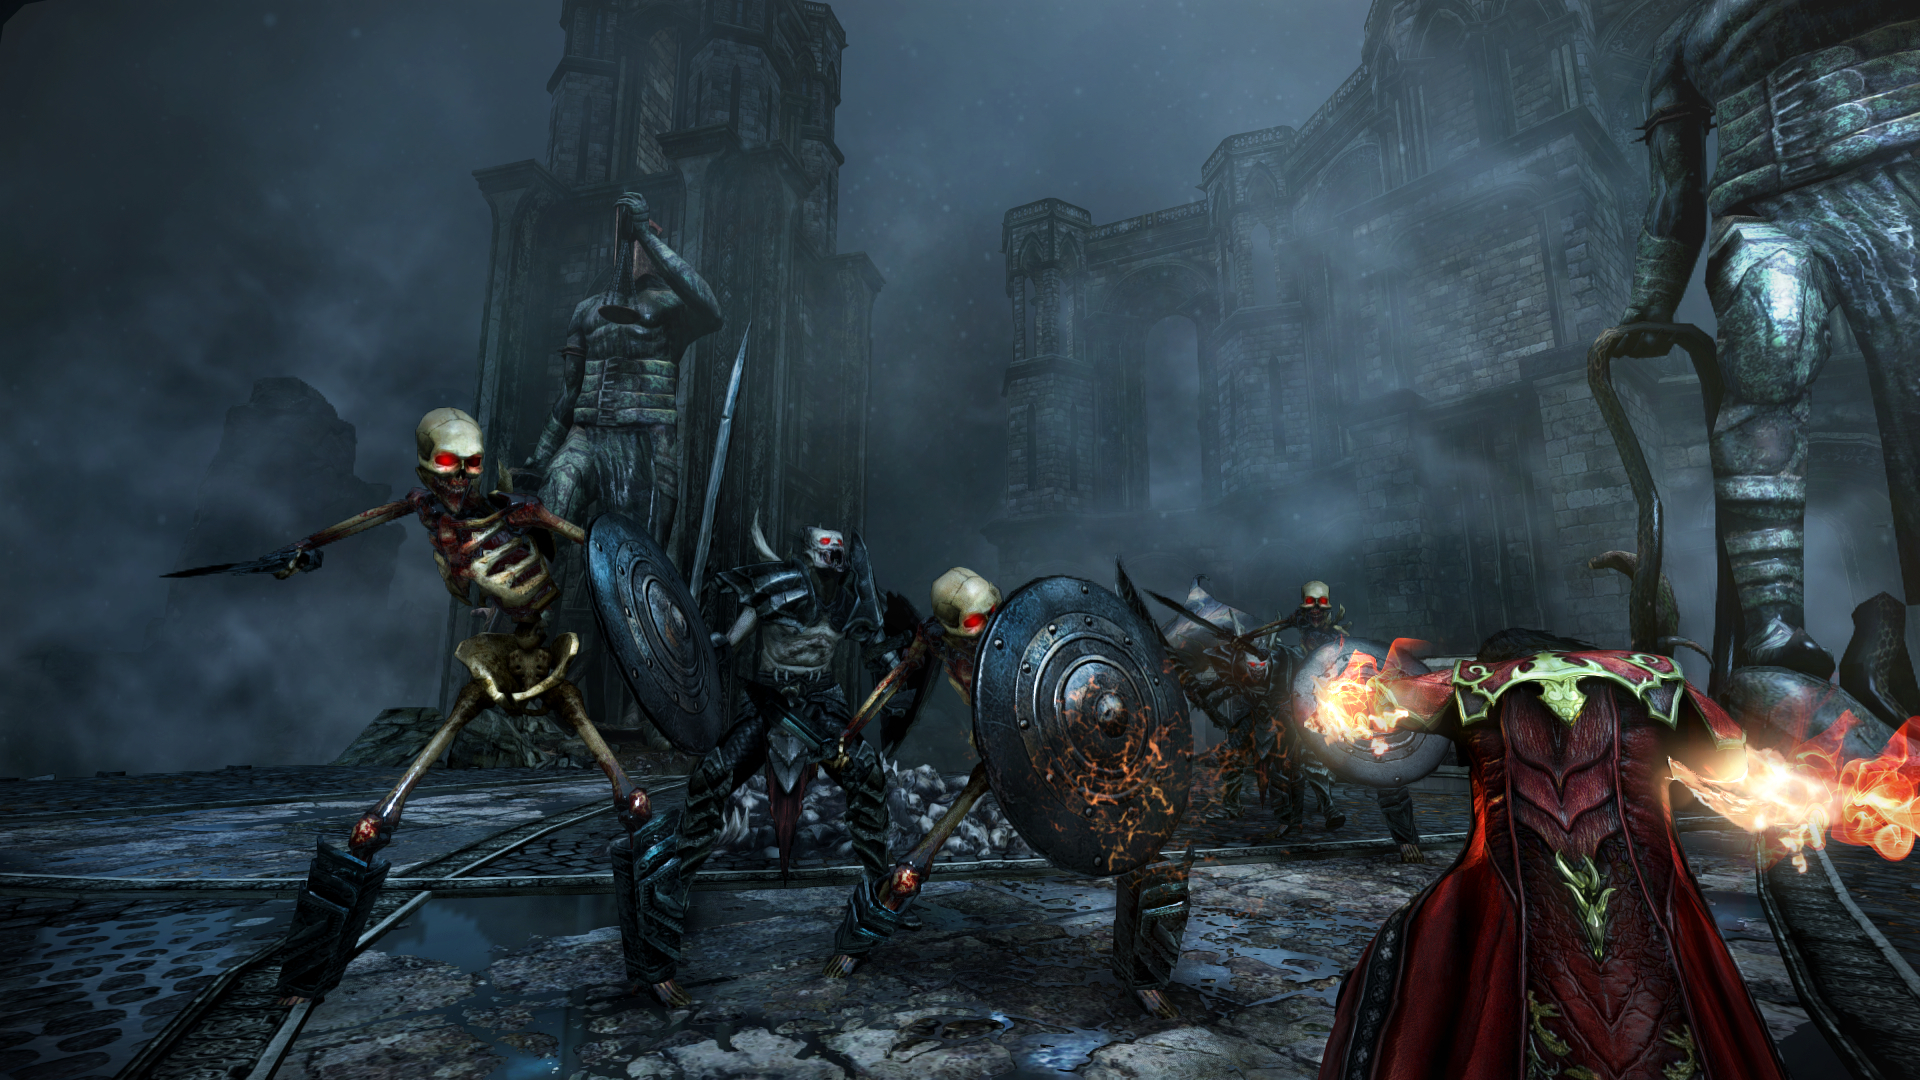 Castlevania: Lords of Shadow 2 complete walkthrough & boss guide